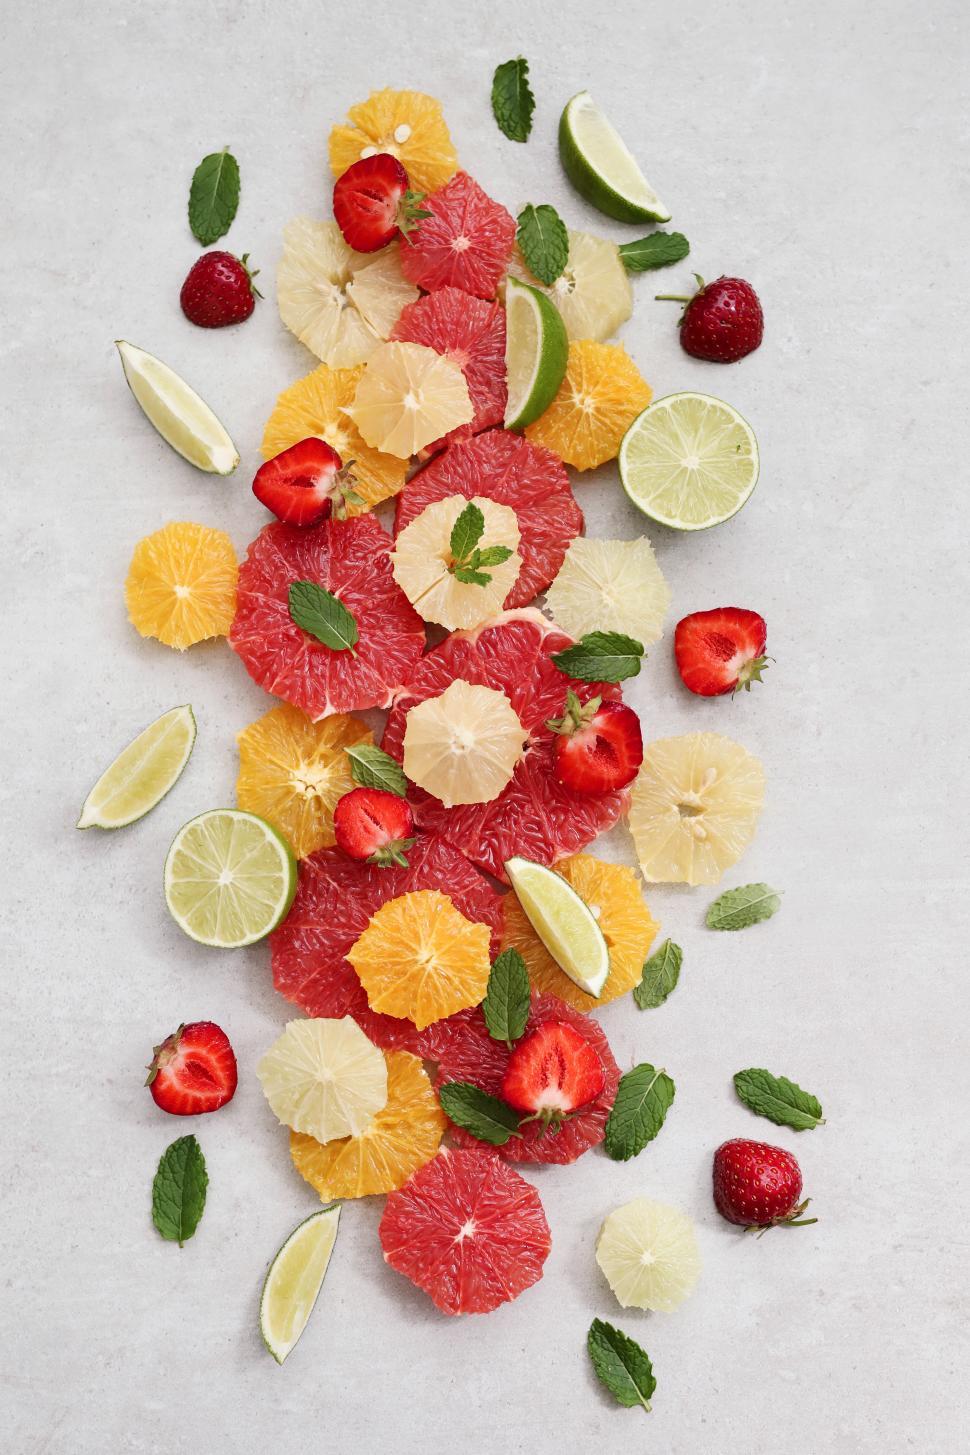 Free Image of Fruit. Citrus and strawberries 